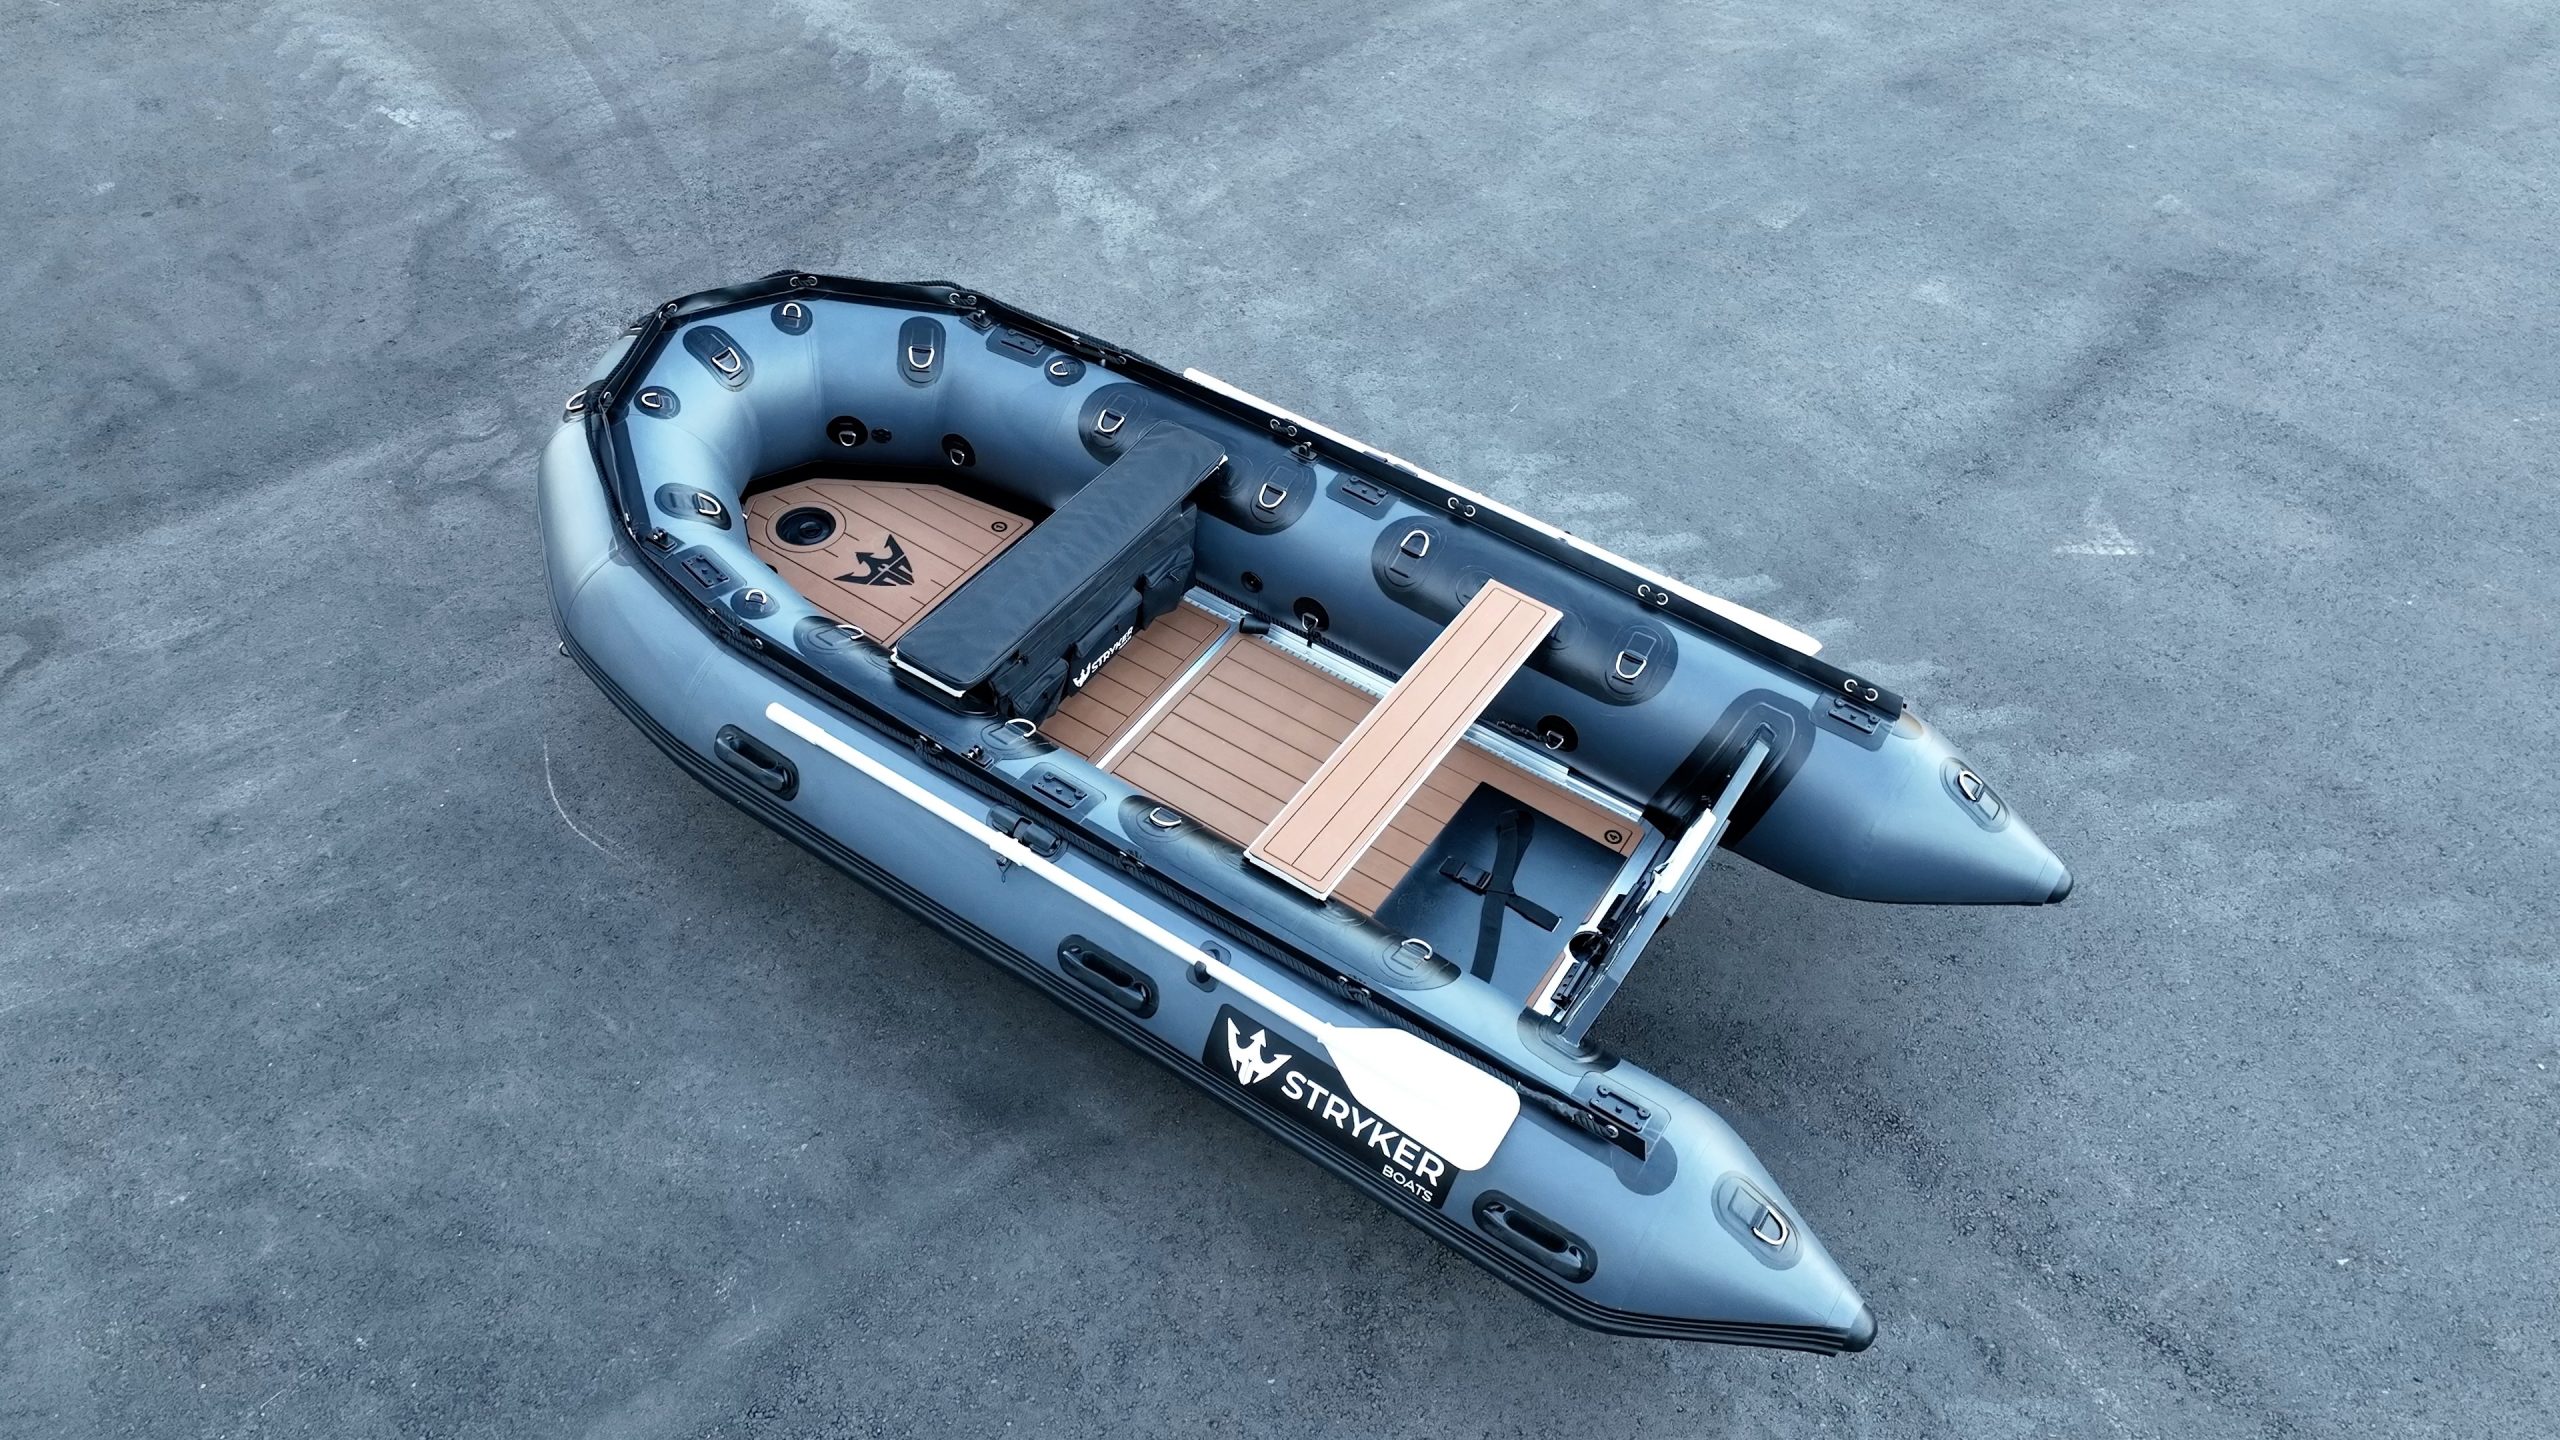 https://strykerboats.com/wp-content/uploads/2023/09/7-scaled.jpg